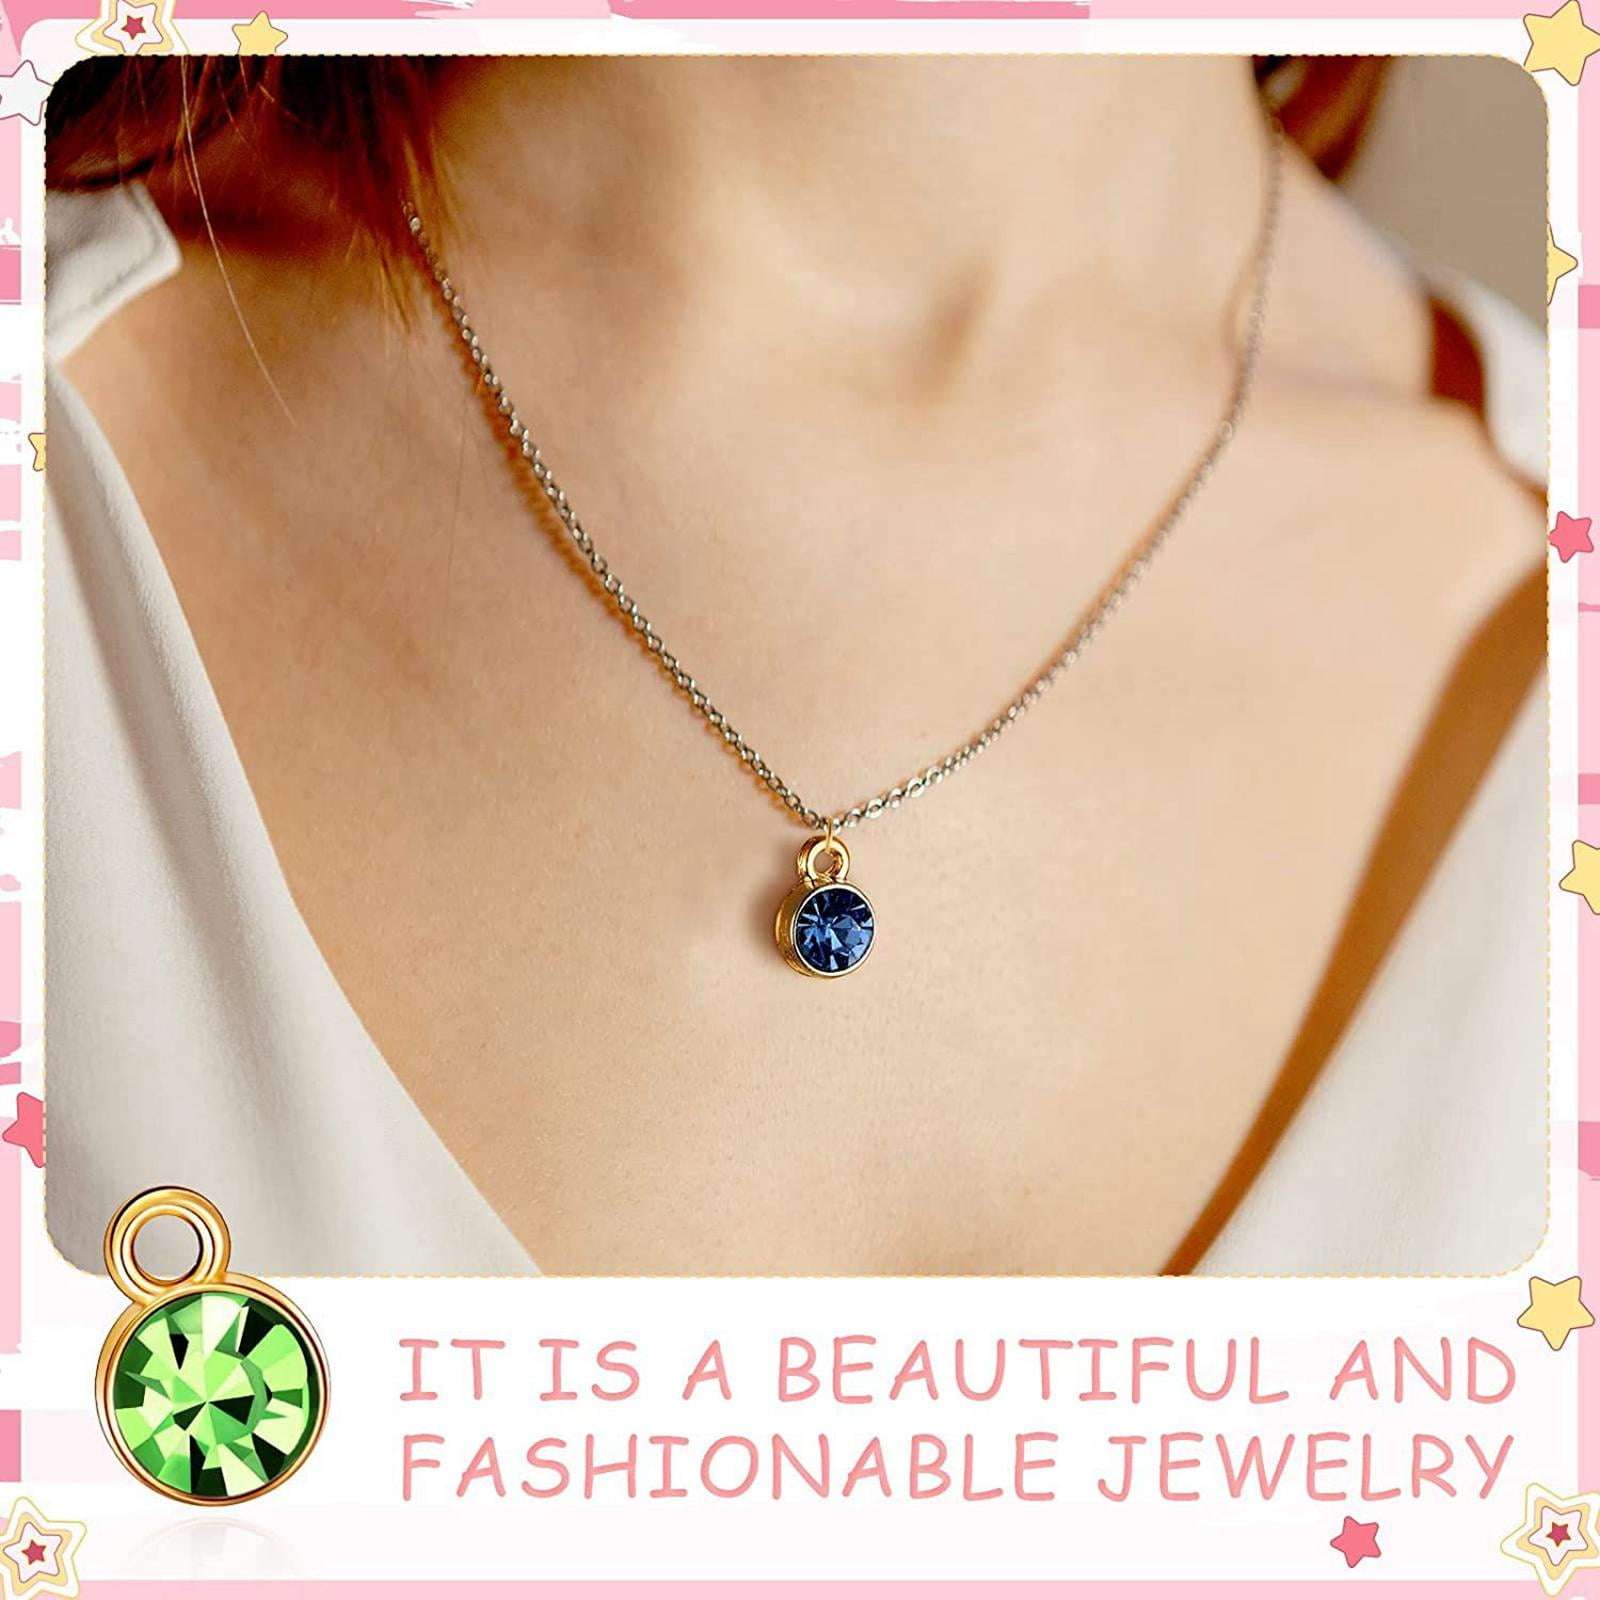 Best Initial Birthstone Necklace for Mom – Get Engravings